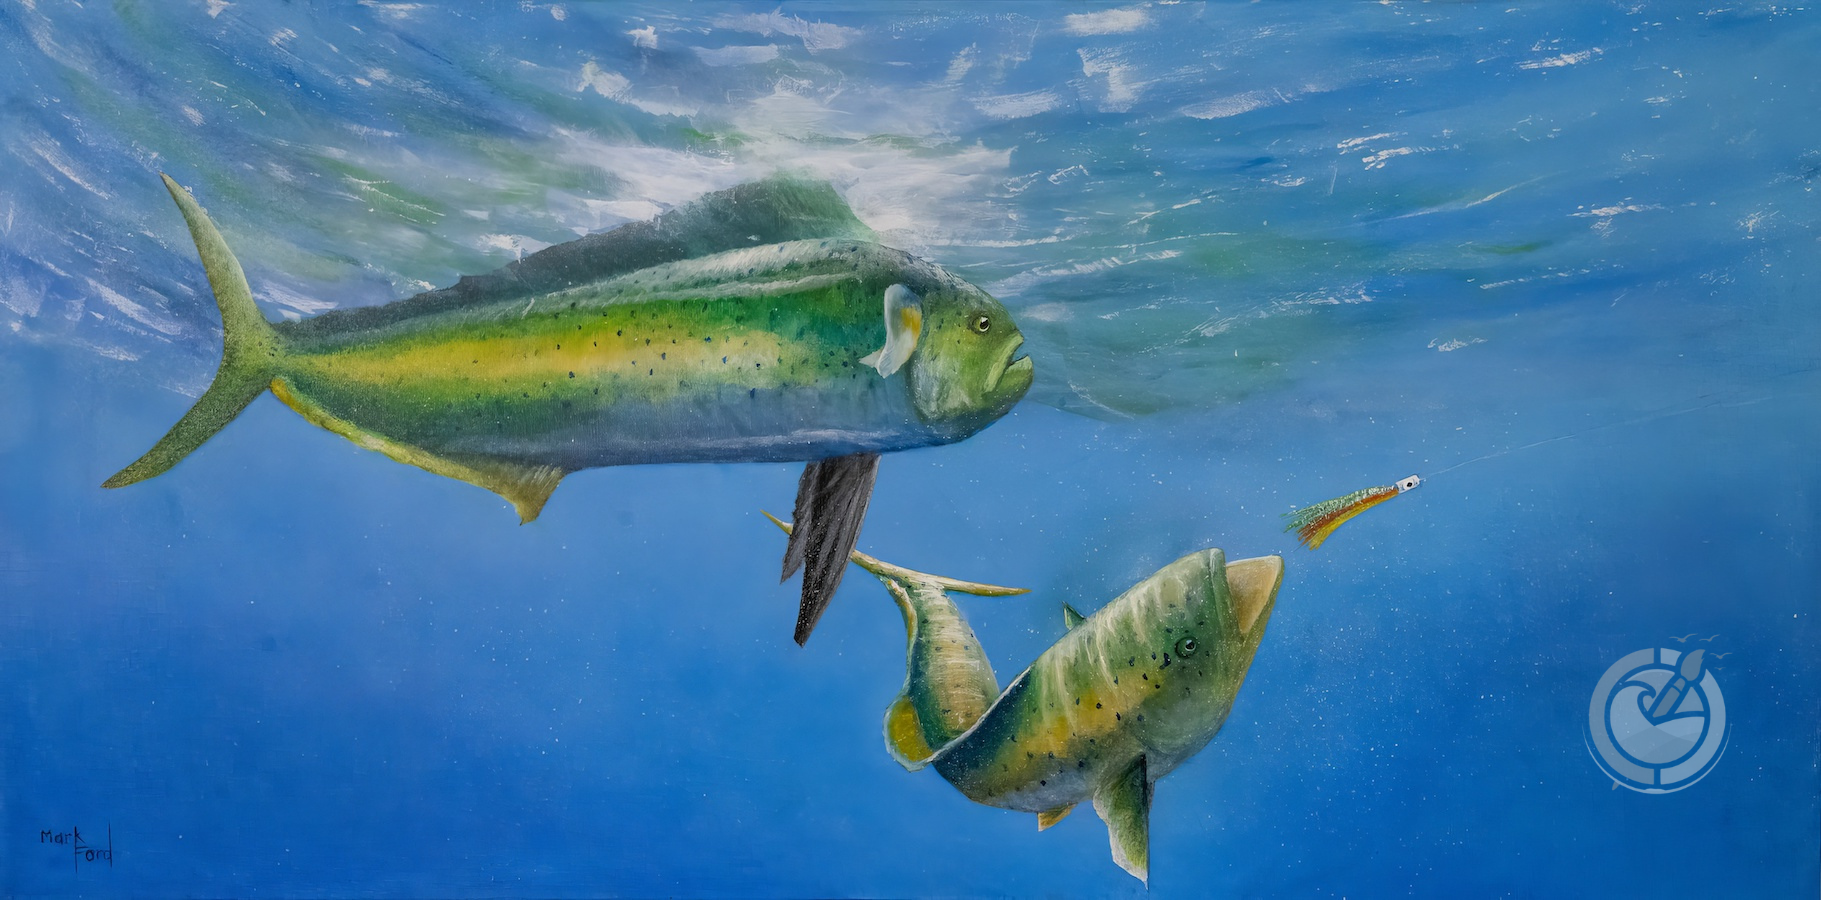 The mahi-mahi, also known as dolphinfish, is a vibrant and highly prized species of fish found in warm oceanic waters around the world.